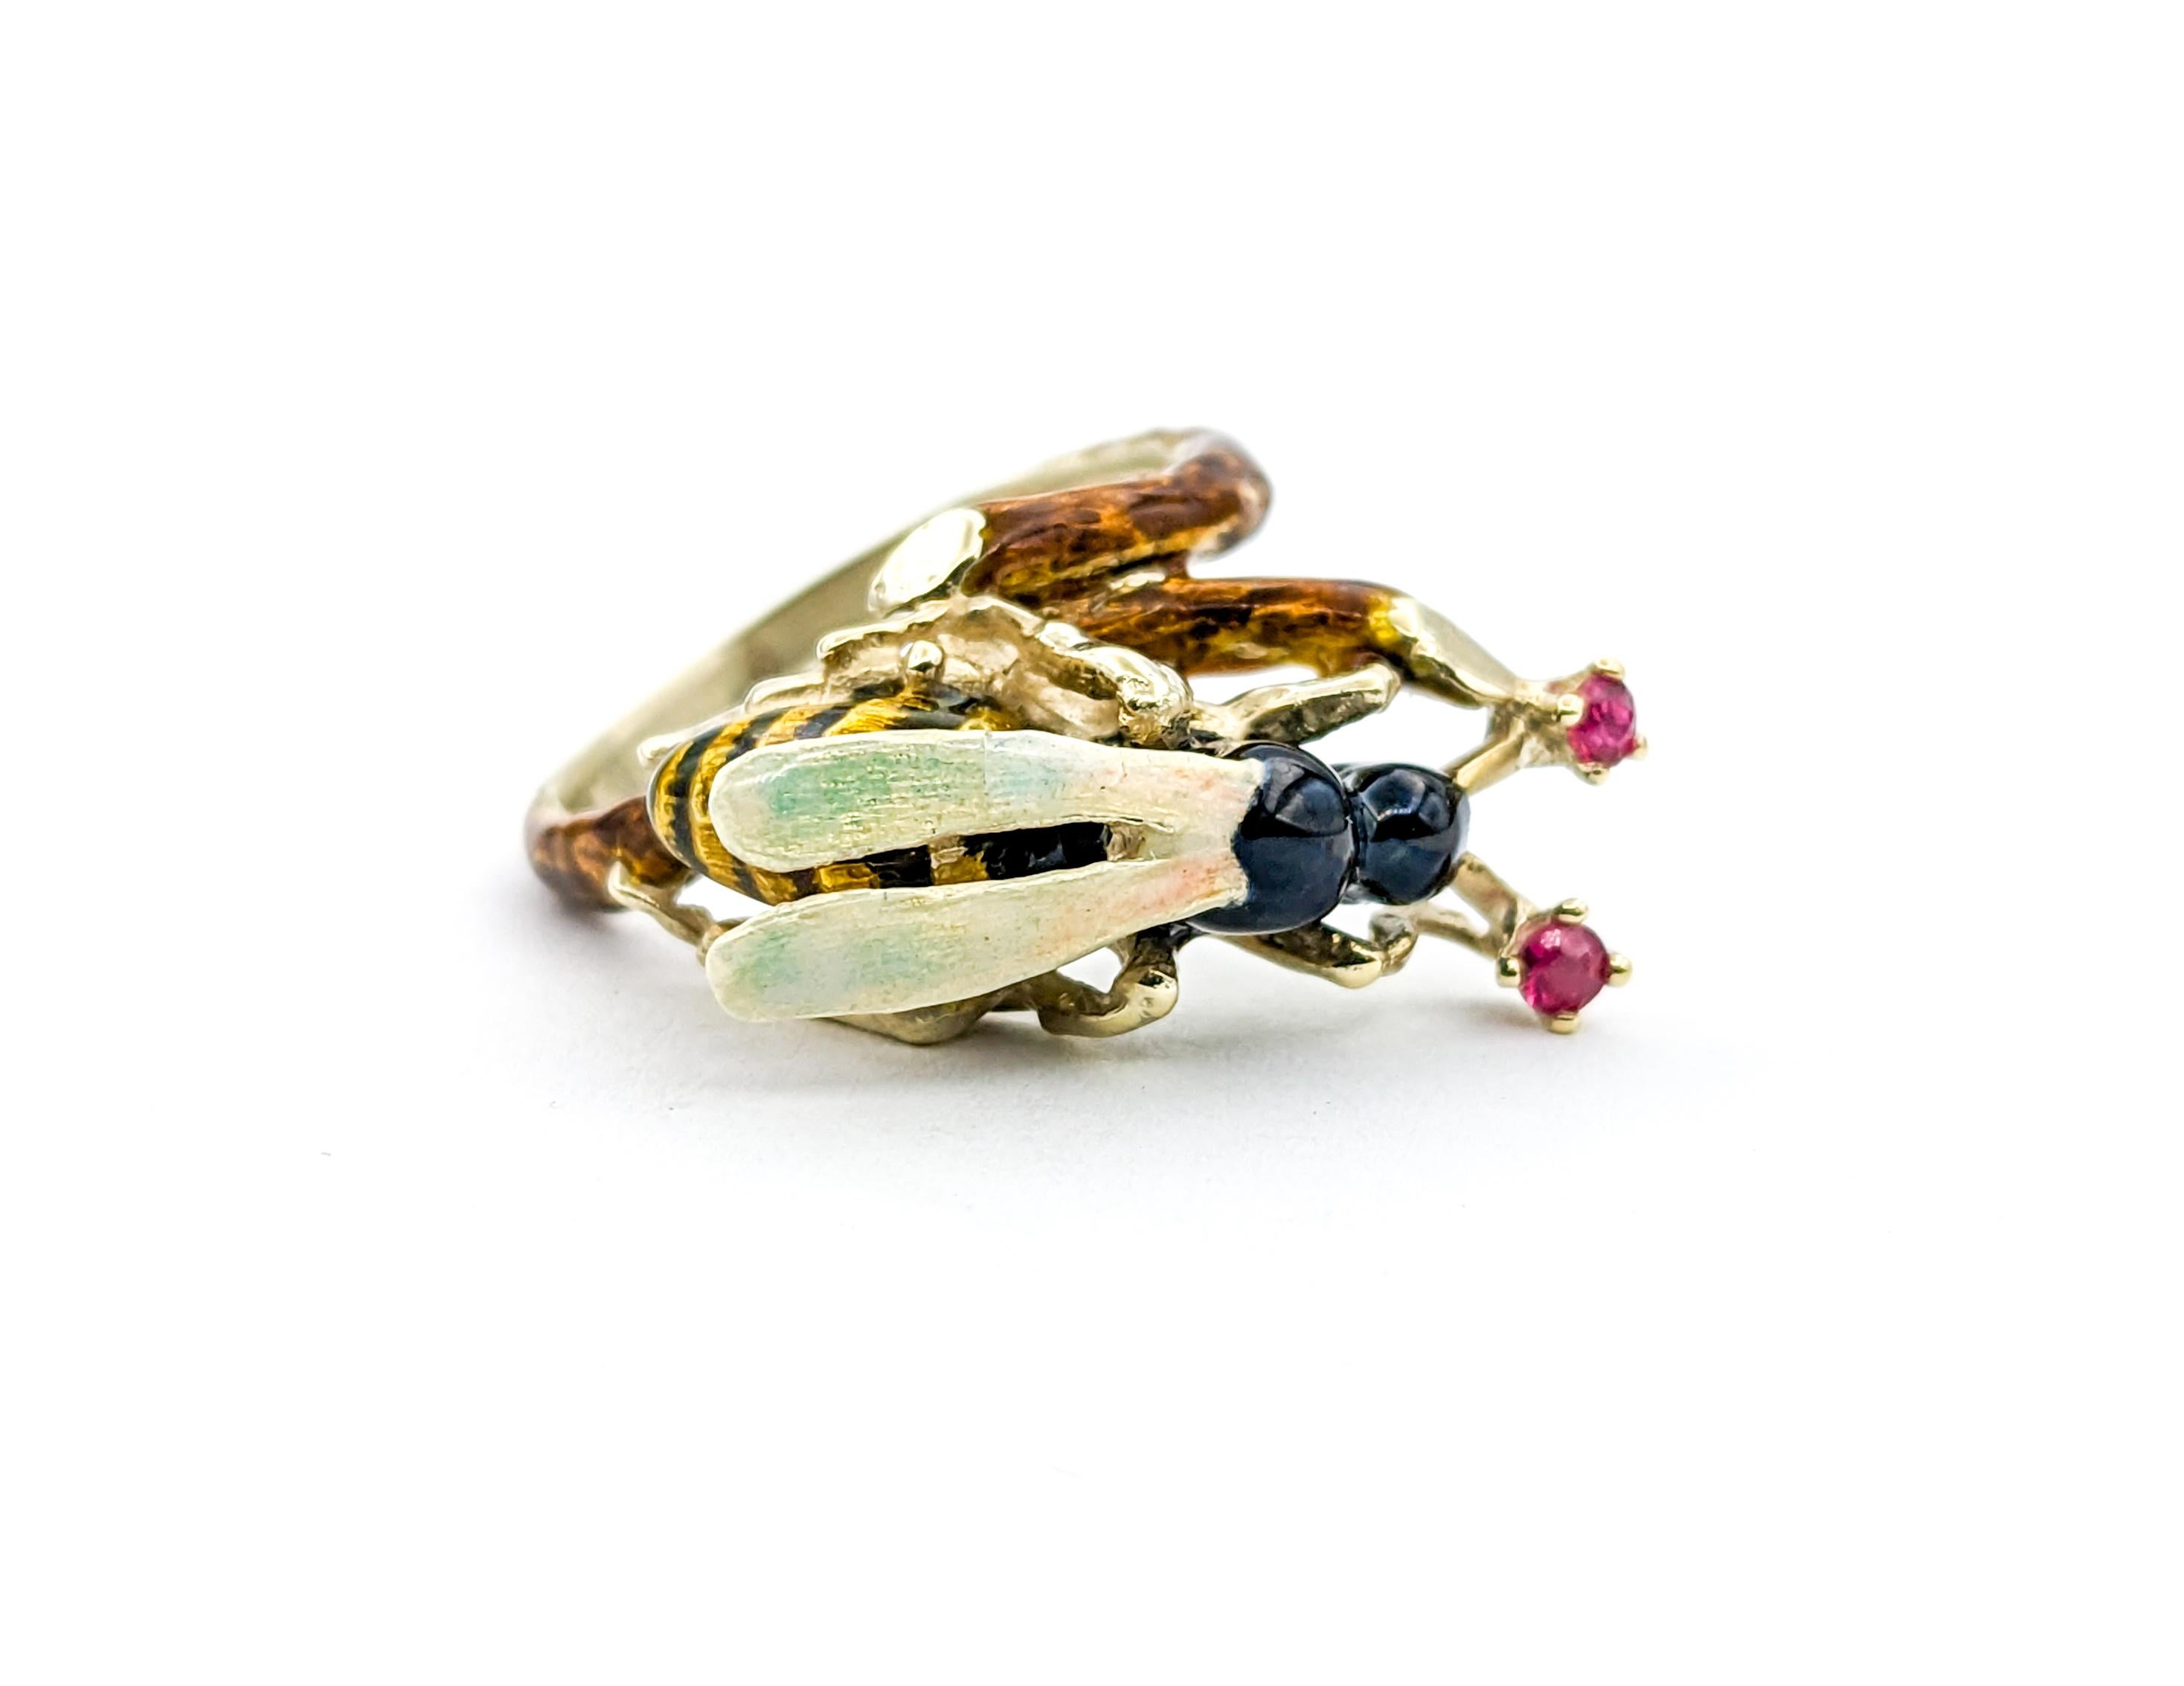 Vintage Figural Enamel Wasp Insect Ring with Rubies In Yellow Gold For Sale 2